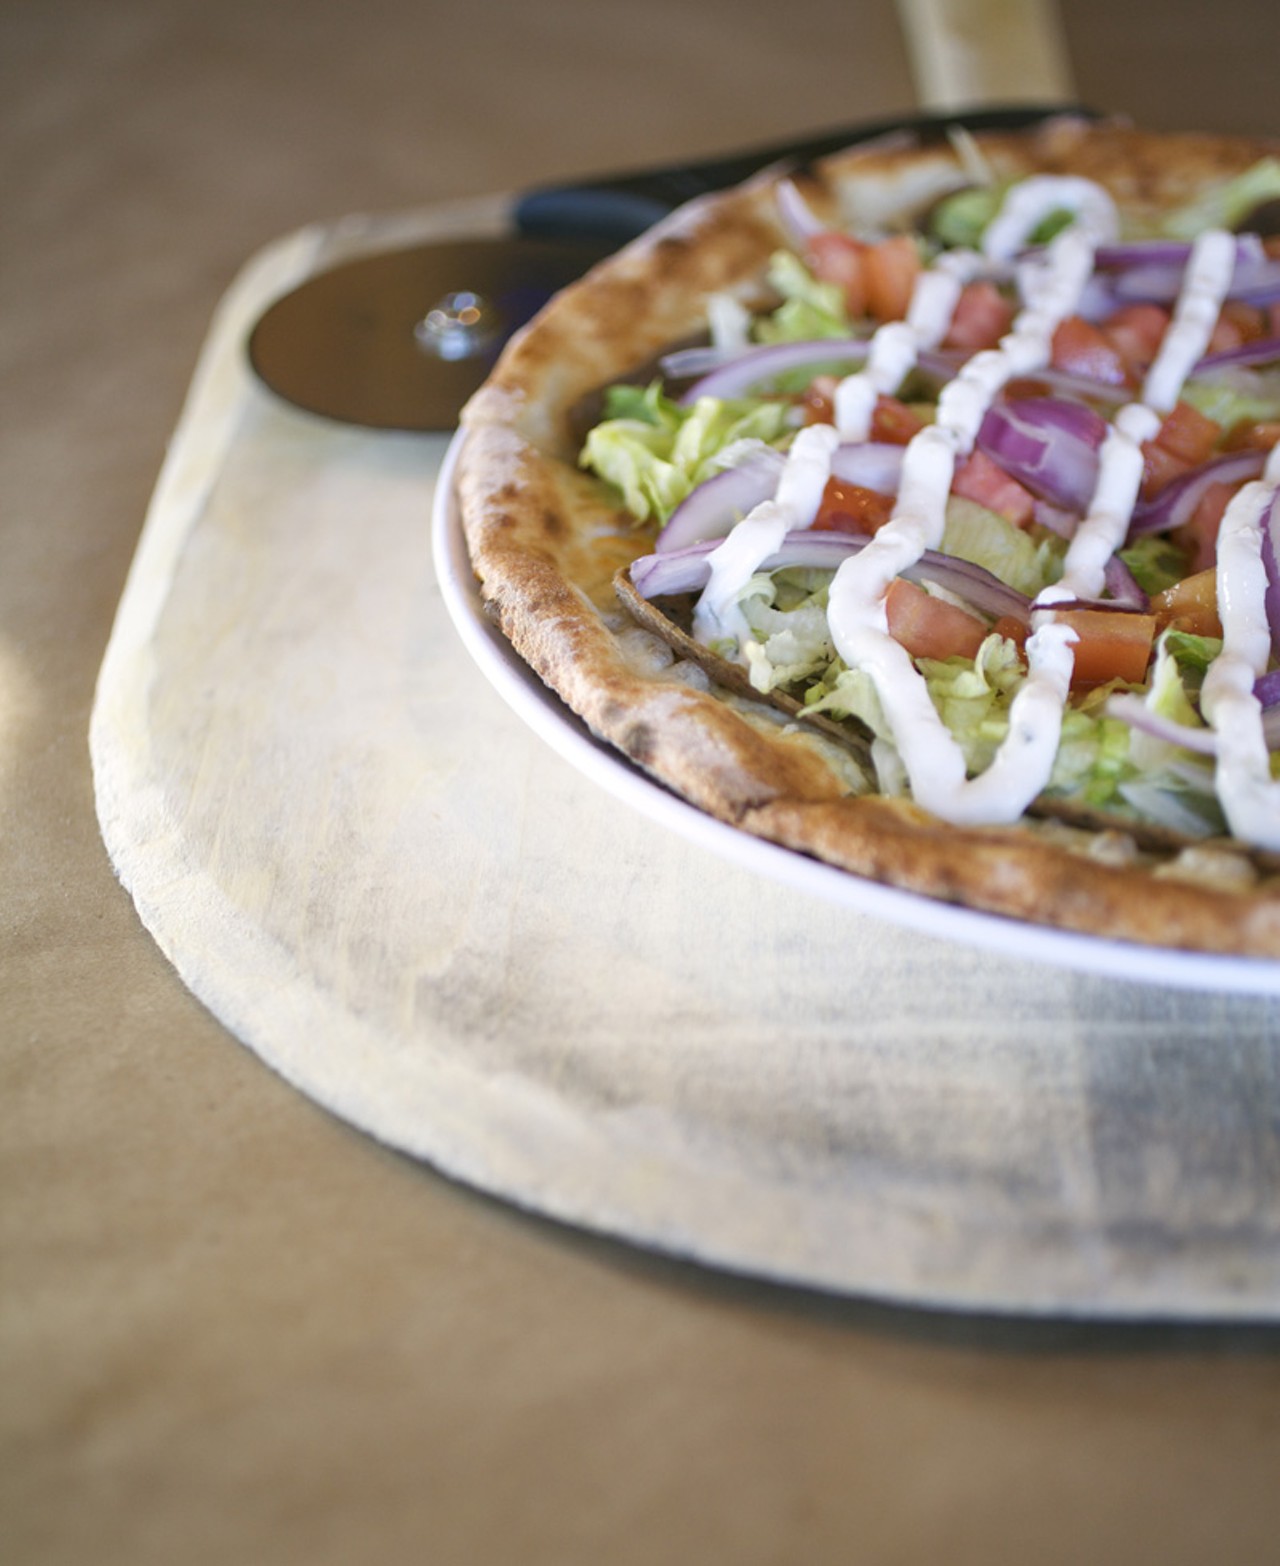 The Villa D'Este is a gyro pizza made with gyro meat, olive oil, feta, tomatoes, red onions, lettuce and tzaziki sauce.